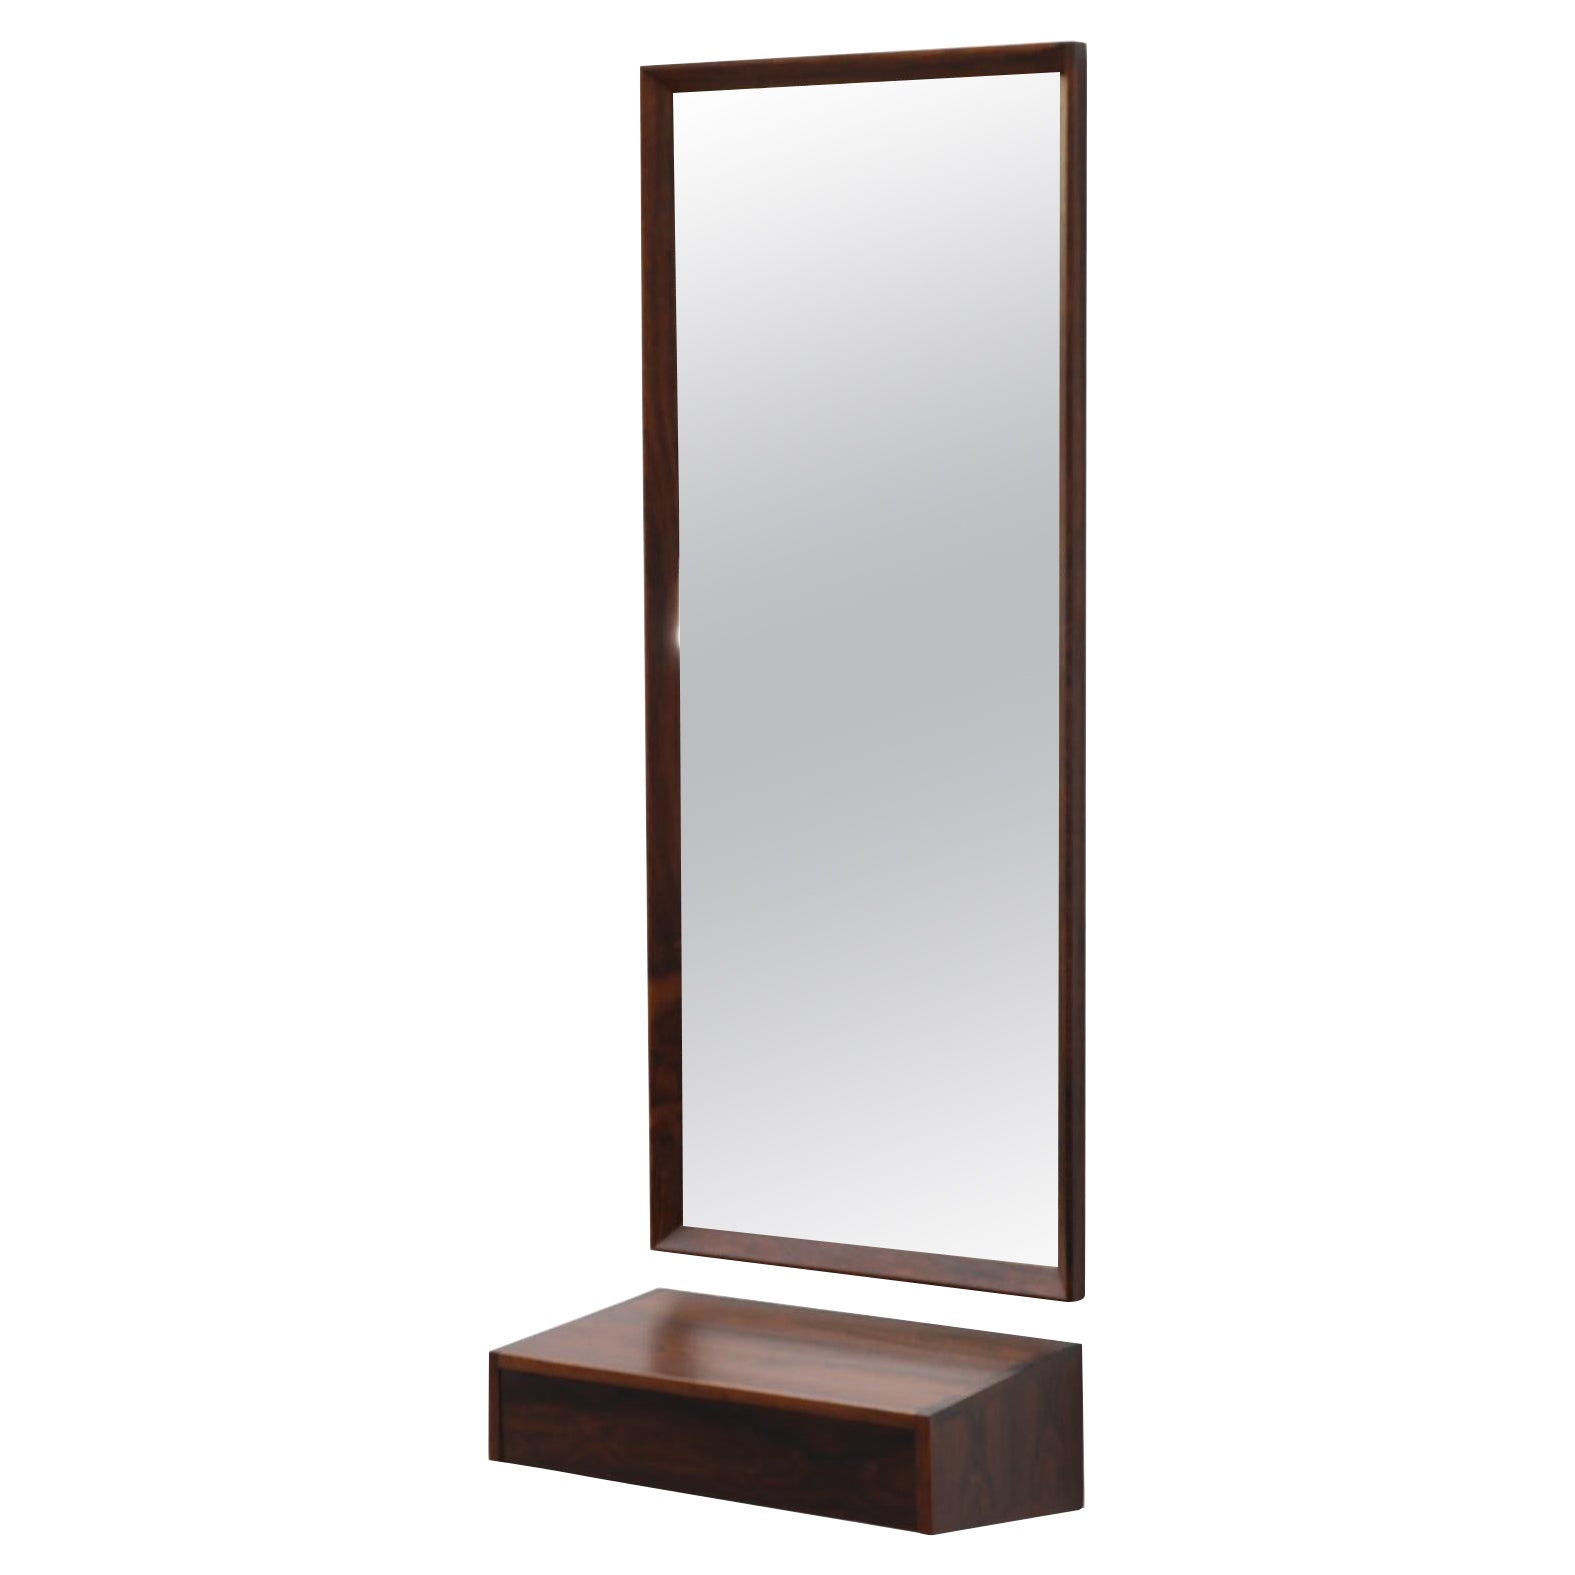 Midcentury Rosewood Mirror and Shelf Entry Set